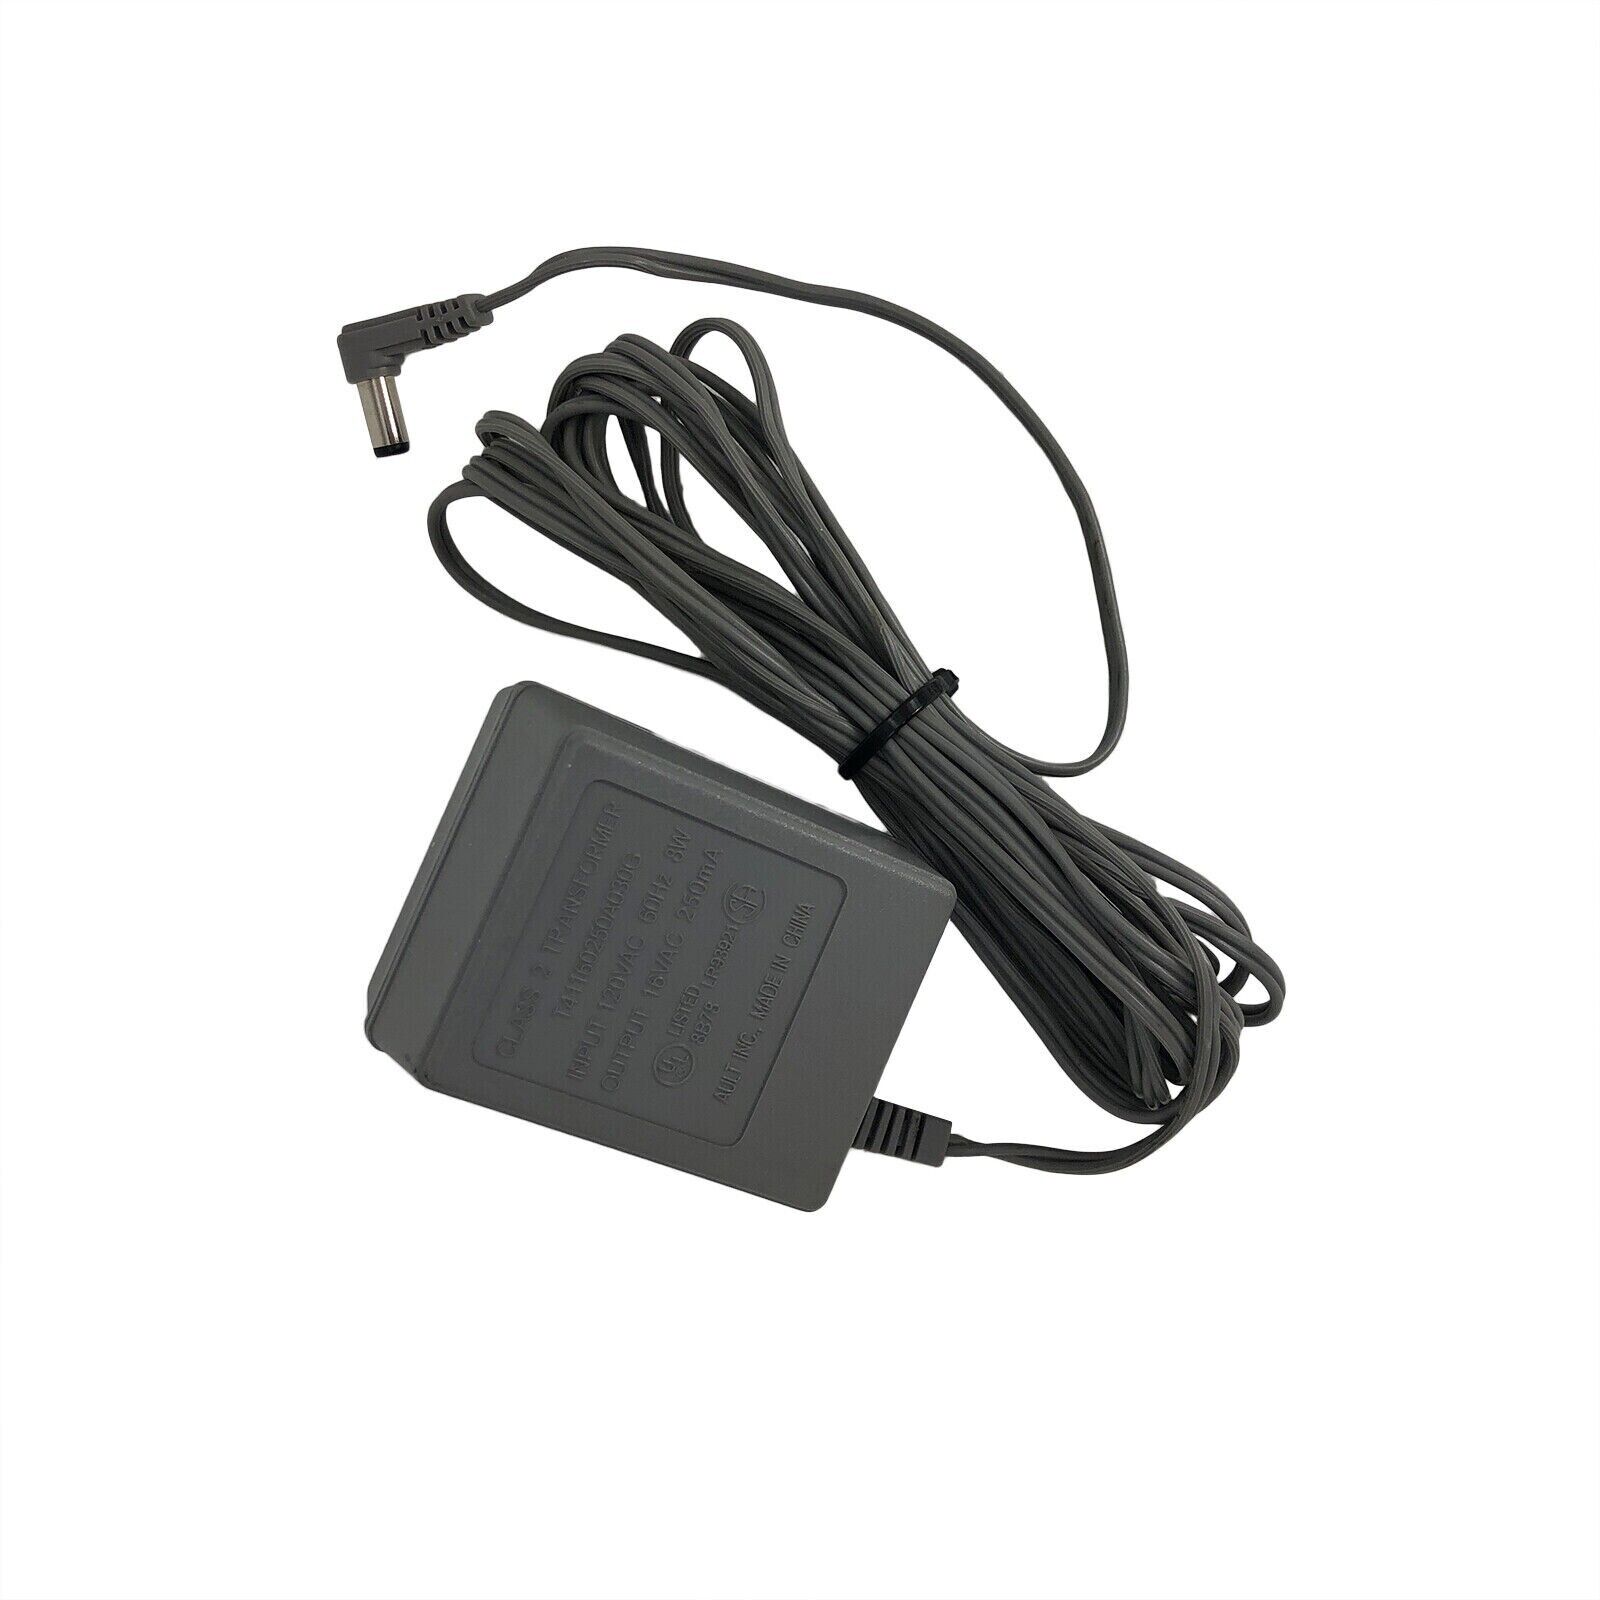 *Brand NEW*Genuine 16VAC 250mA AC Adapter for Nortel Meridian Aastra 9316 M9316 9316CW M9316CW Phone Power Sup